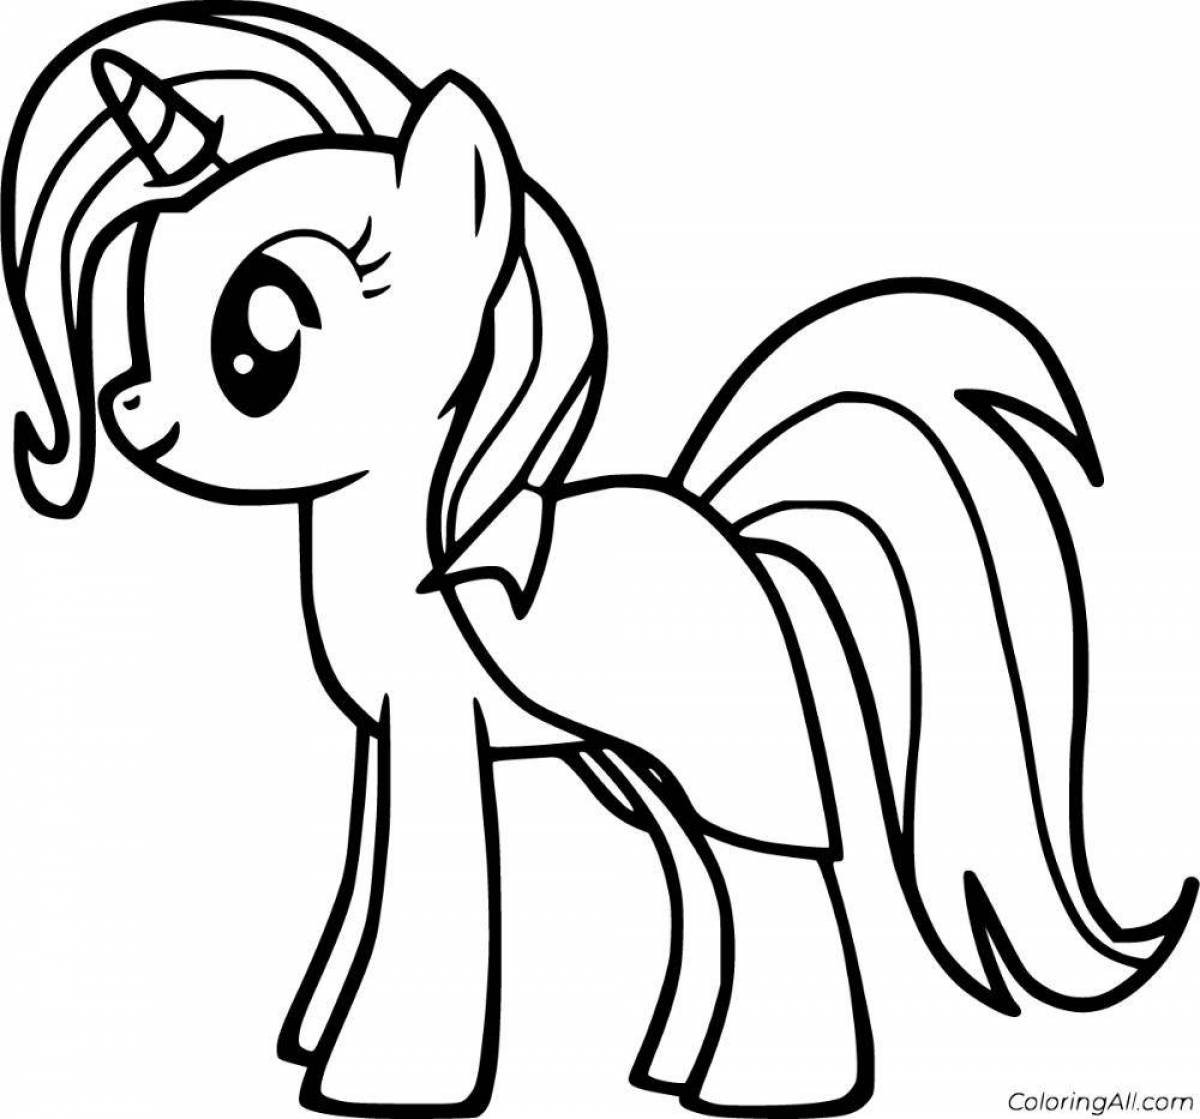 Coloring page sparkling pony trixie